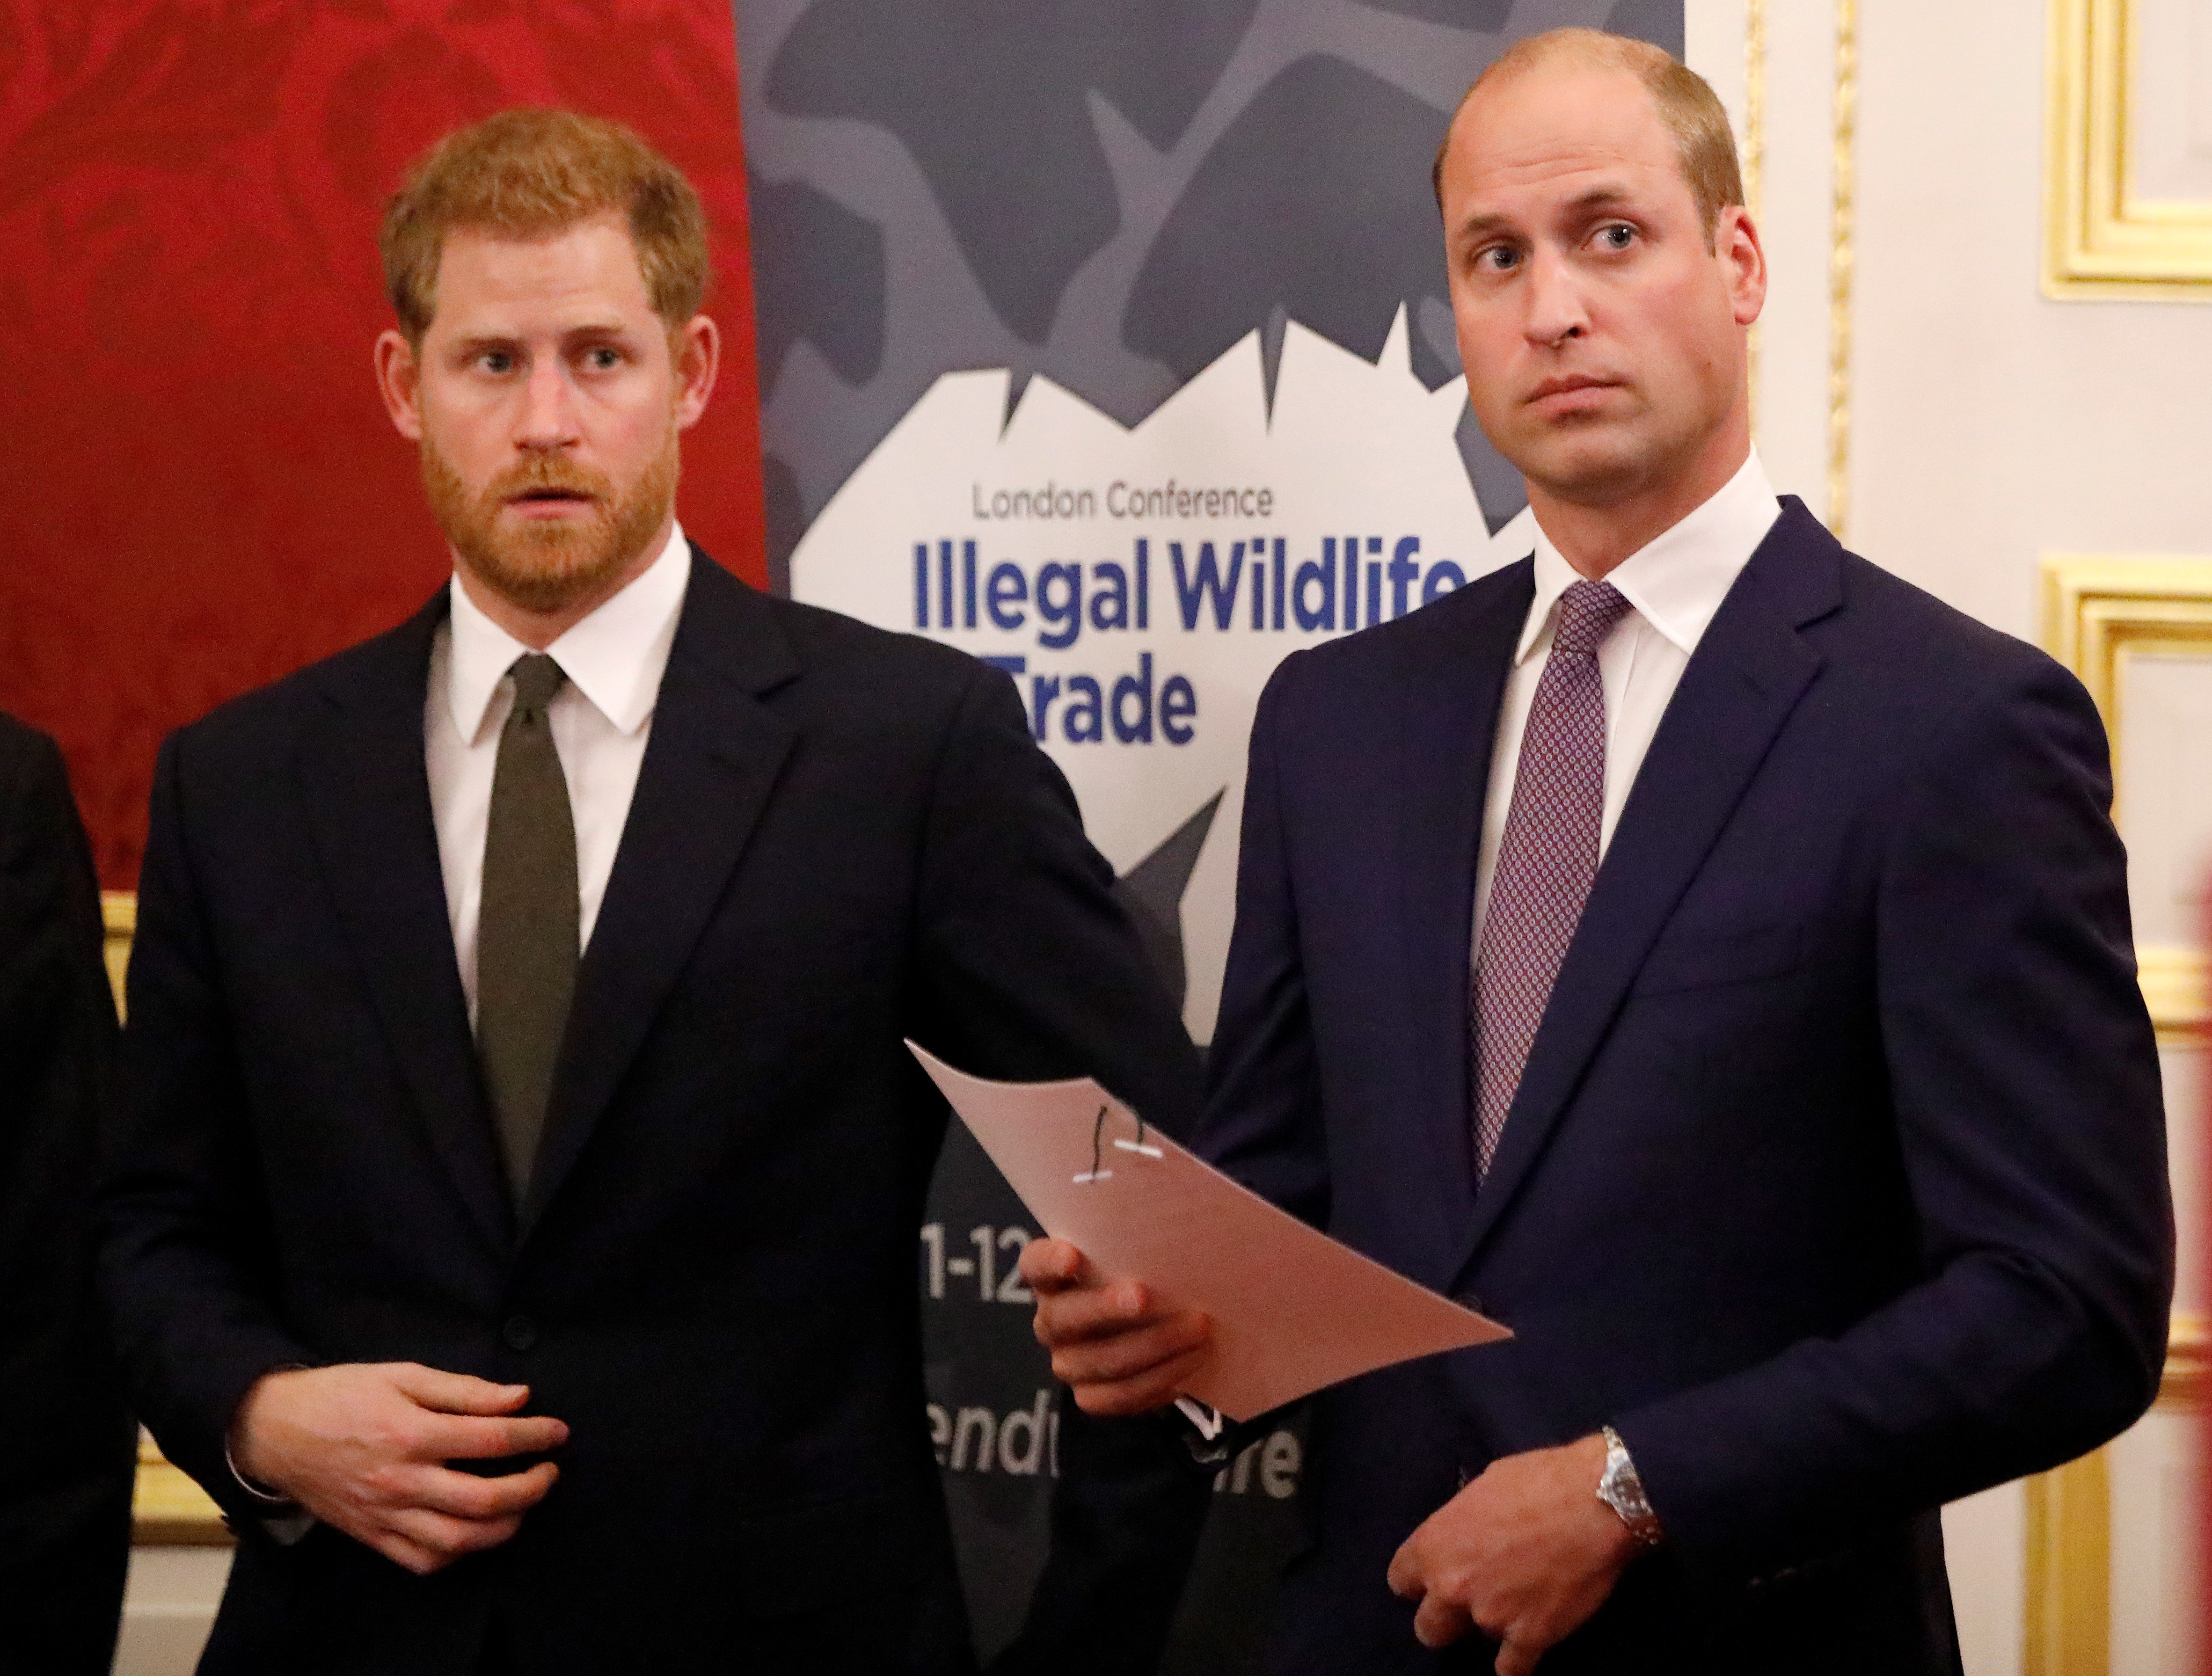 Prince William, Duke of Cambridge (R) and Prince Harry, Duke of Sussex host a reception to officially open the 2018 Illegal Wildlife Trade Conference at St James's Palace on October 10, 2018 in London, England.  |  Source: Getty Images